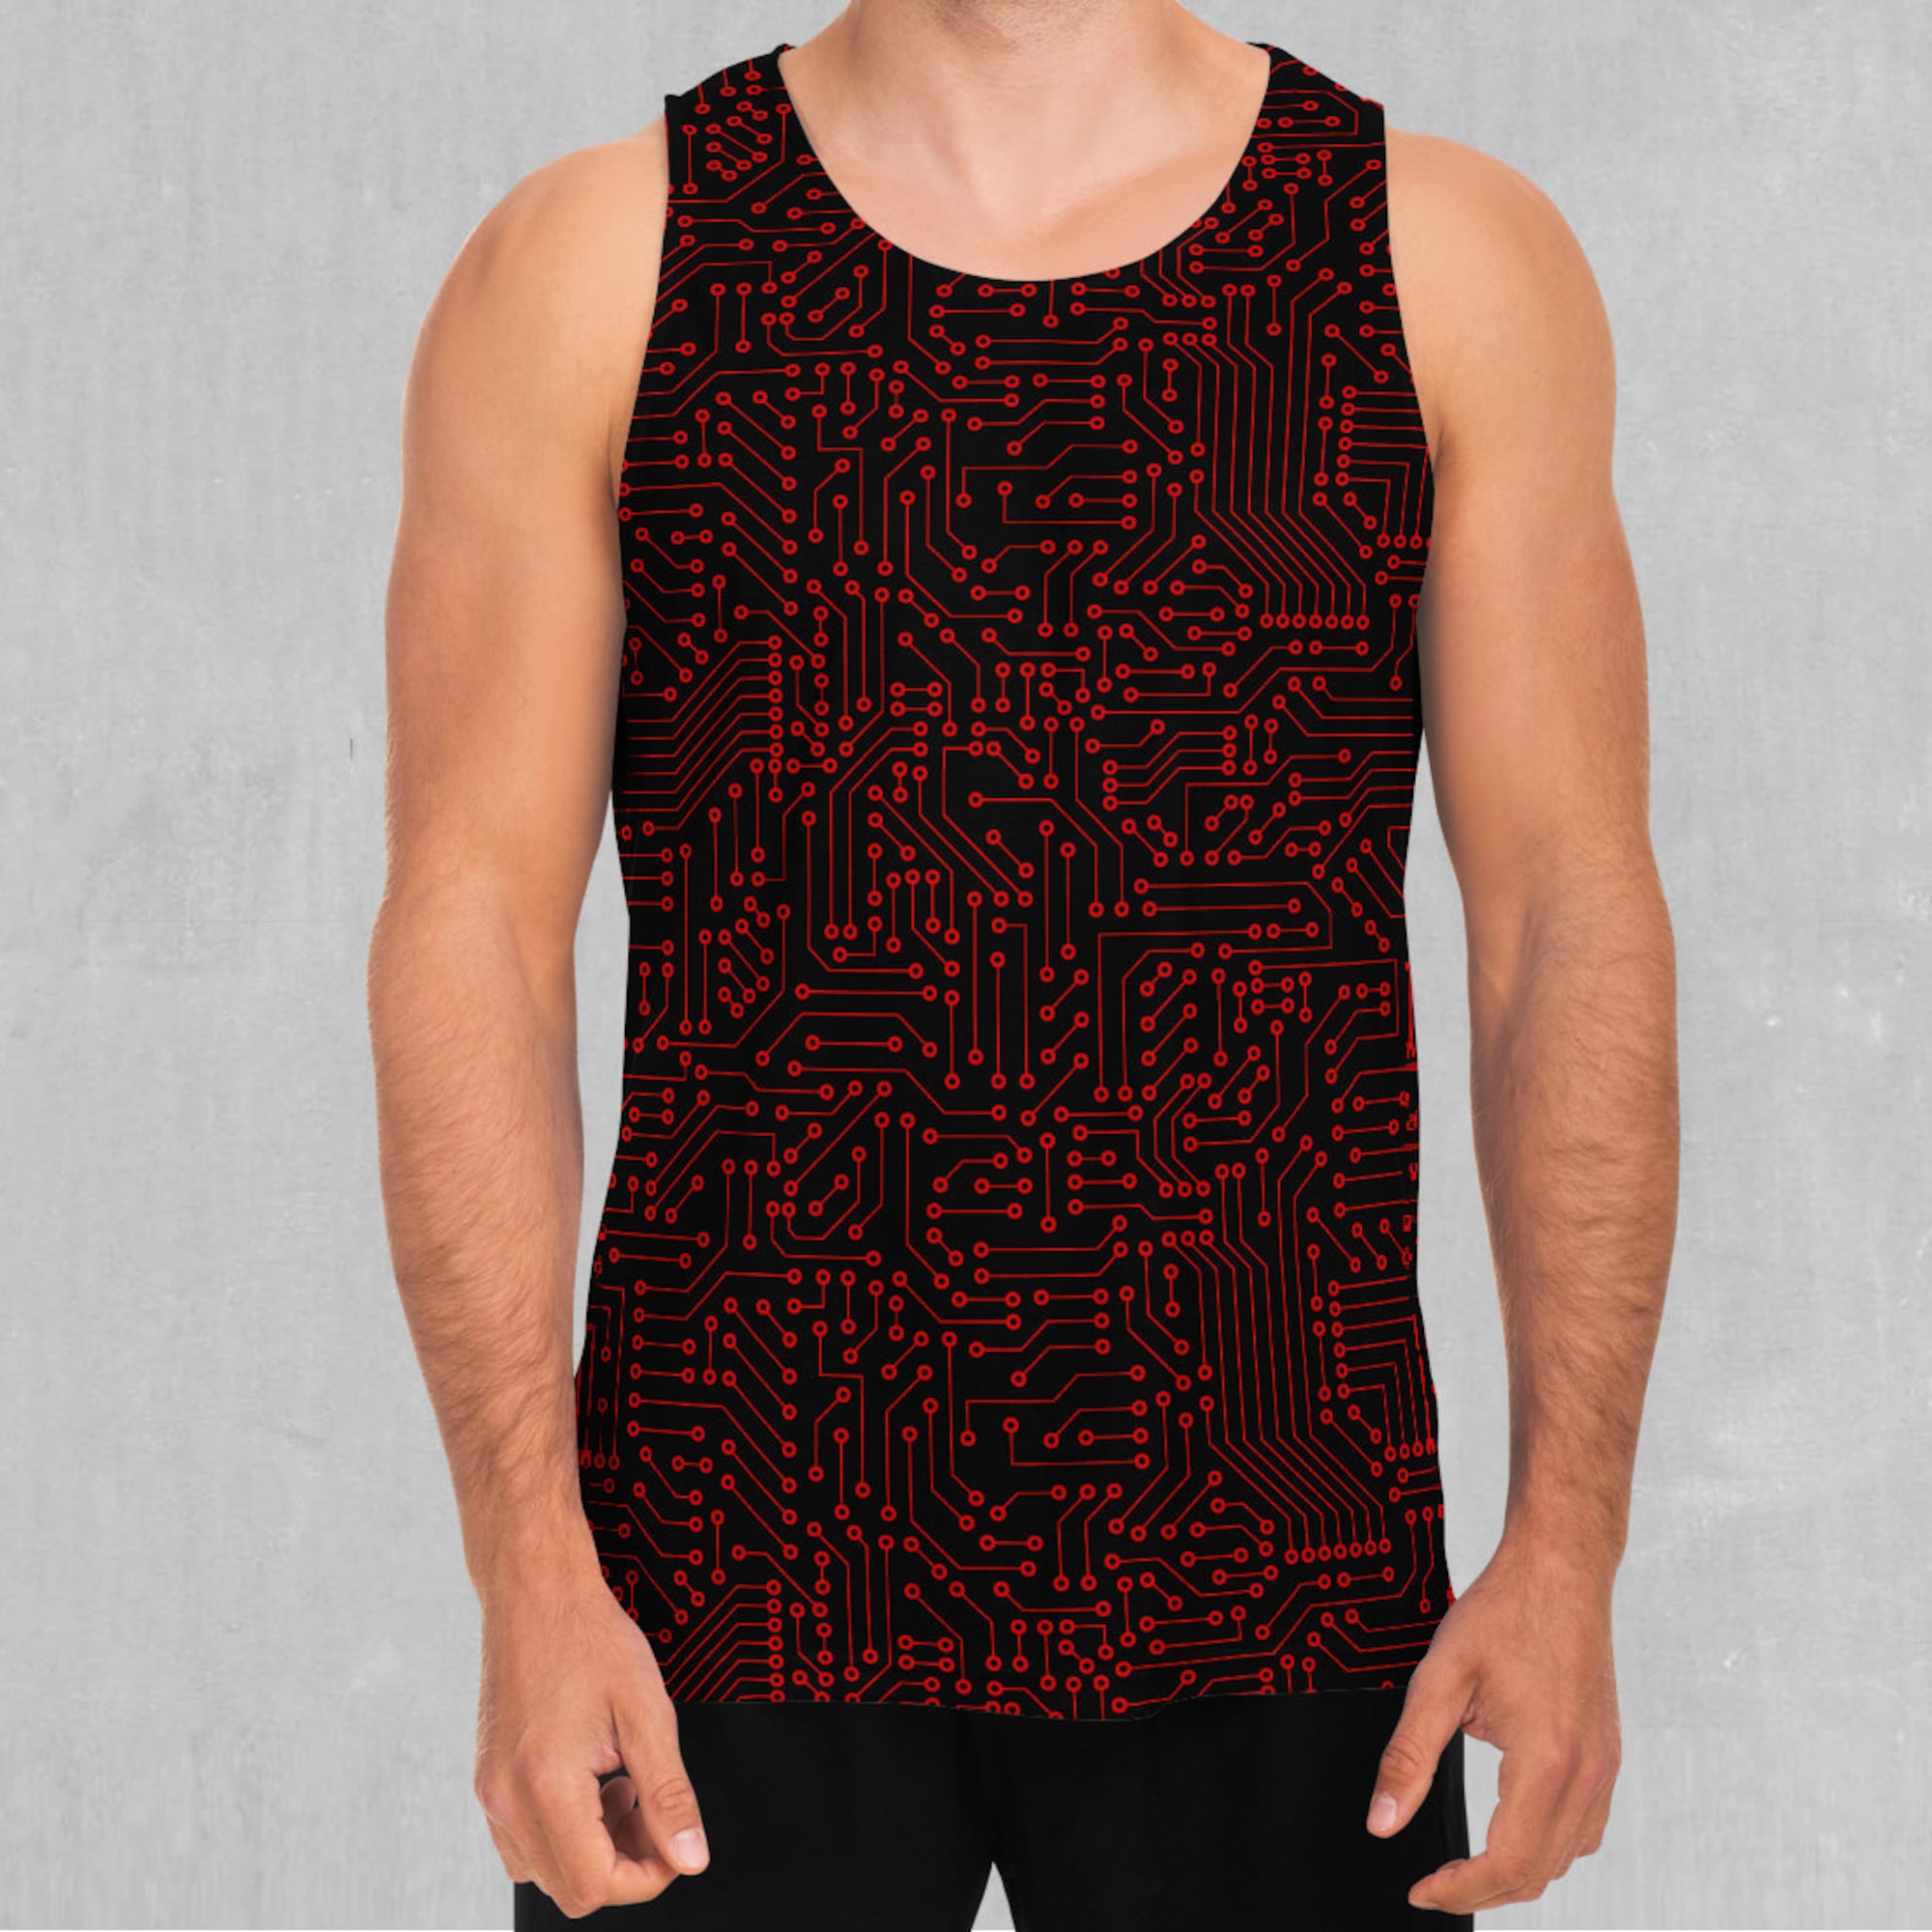 Red Cybernetic Men's Tank Top Muscle Sleeveless Shirt